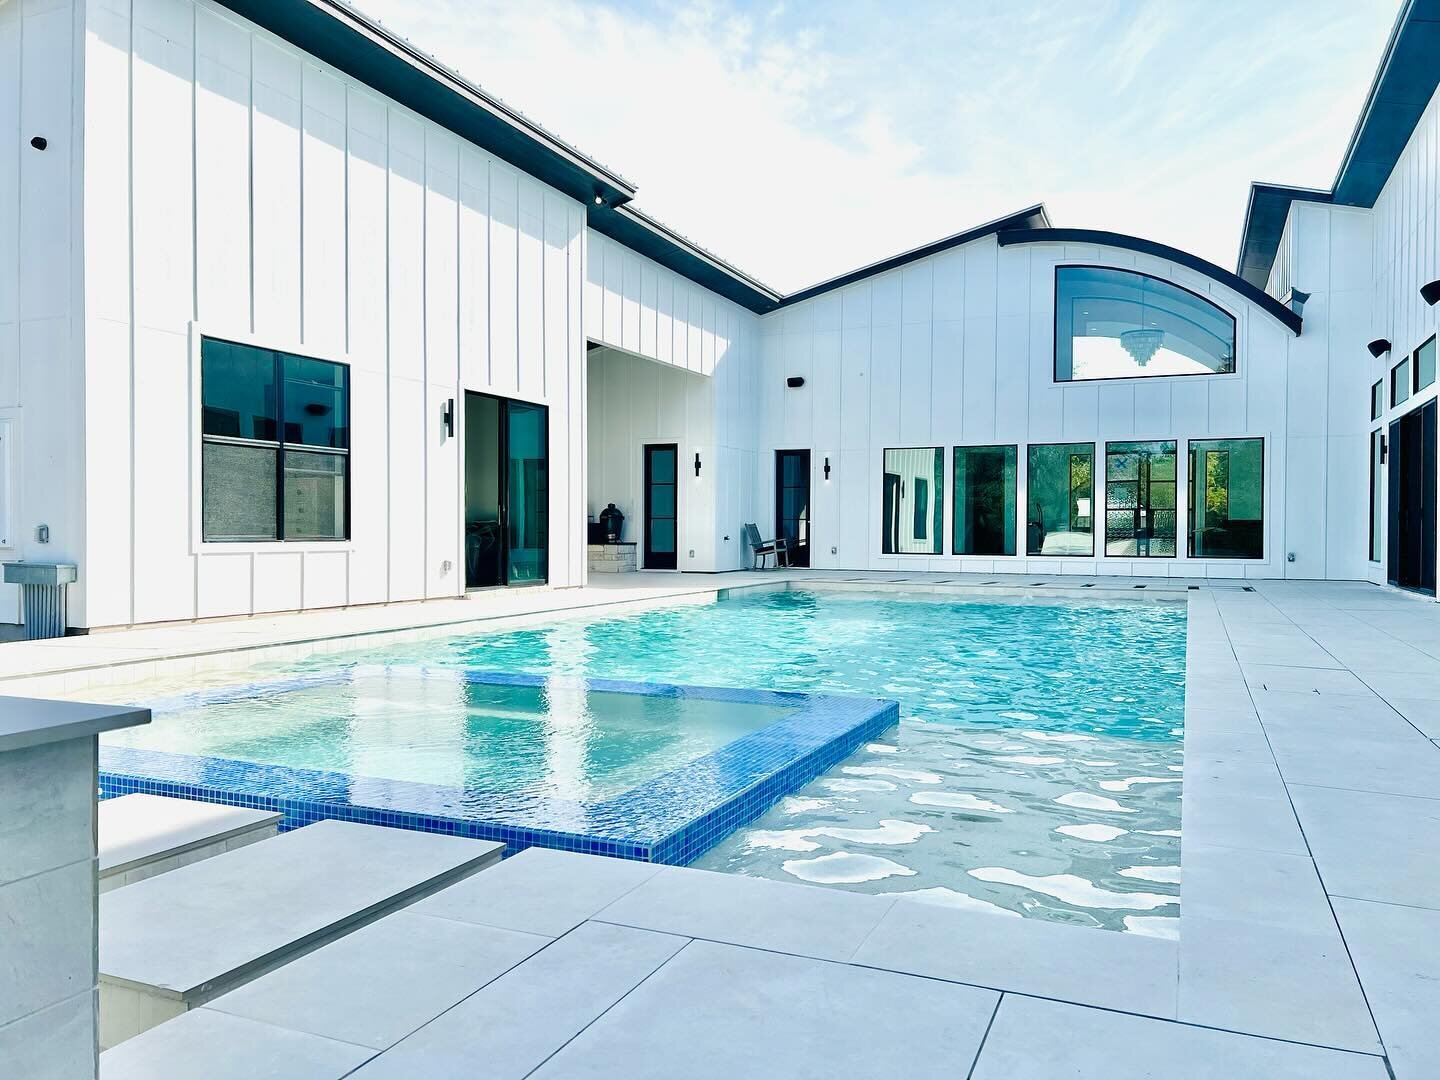 This project was so fun!  The client wanted white on white, with some more white, but opted for a pop of color on the spa. @belgardoutdoorliving porcelain pavers were the perfect solution! 

@gowithsignature 
#CustomPoolsandSpas
#CentralTexasCustomPo